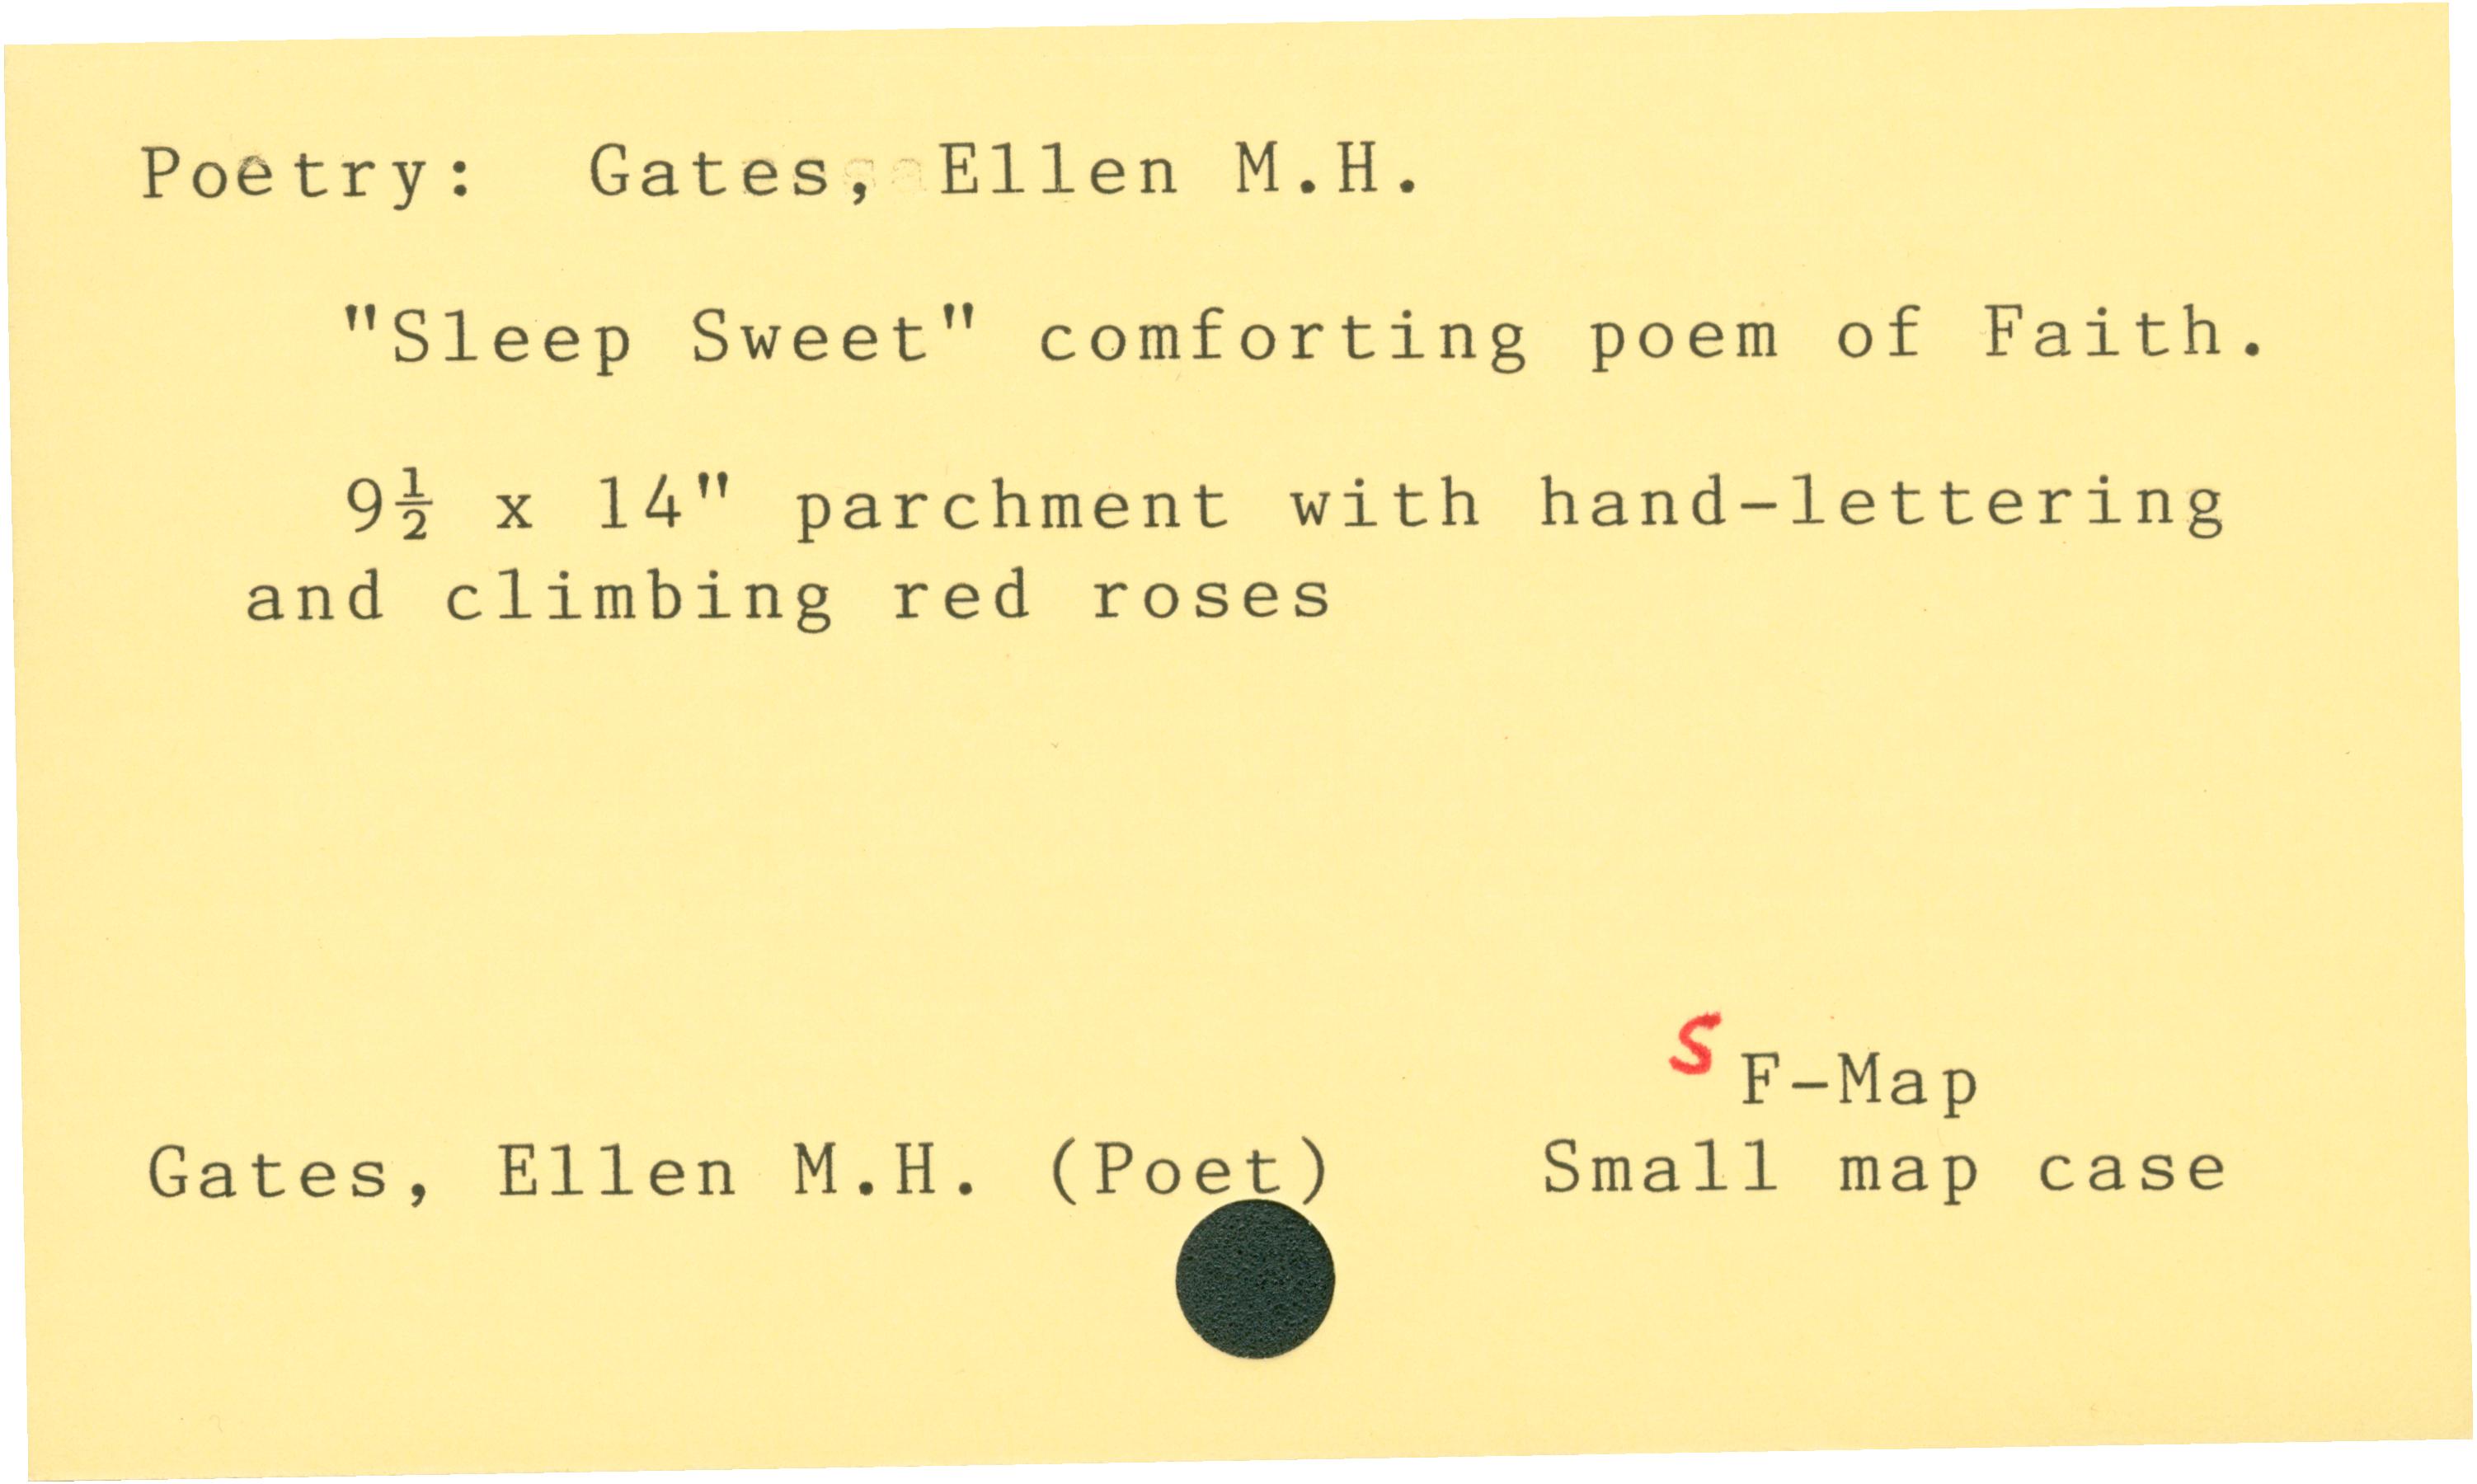 Textual File: Poetry: Gates, Ellen M. H. [Small F-Map]